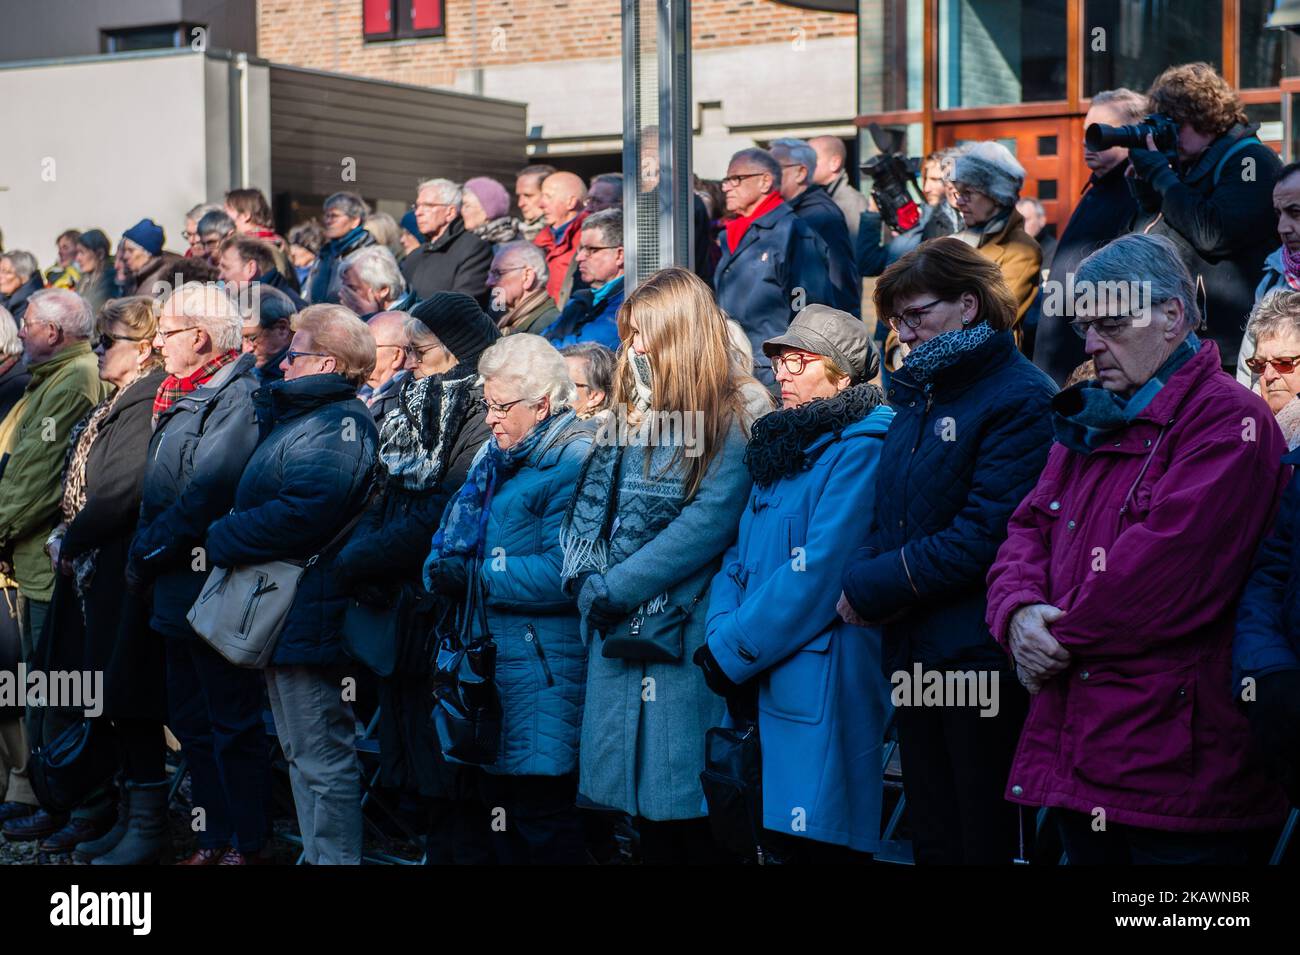 People take part at annual commemoration of the bombing in Nijmegen, Netherlands, on 22 February 2018. he Bombing of Nijmegen was an unplanned bombing attack by American aircraft on the city of Nijmegen in the Netherlands on 22 February 1944. During this Allied mistake bombing, almost 800 people were killed and a large part of the city center of Nijmegen was destroyed. Every February 22nd an official commemoration has take place at the Raadhuishof, the location where the Montessori school was located, where 24 children and 8 sisters were killed. There a monument called 'De Schommel' was erecte Stock Photo